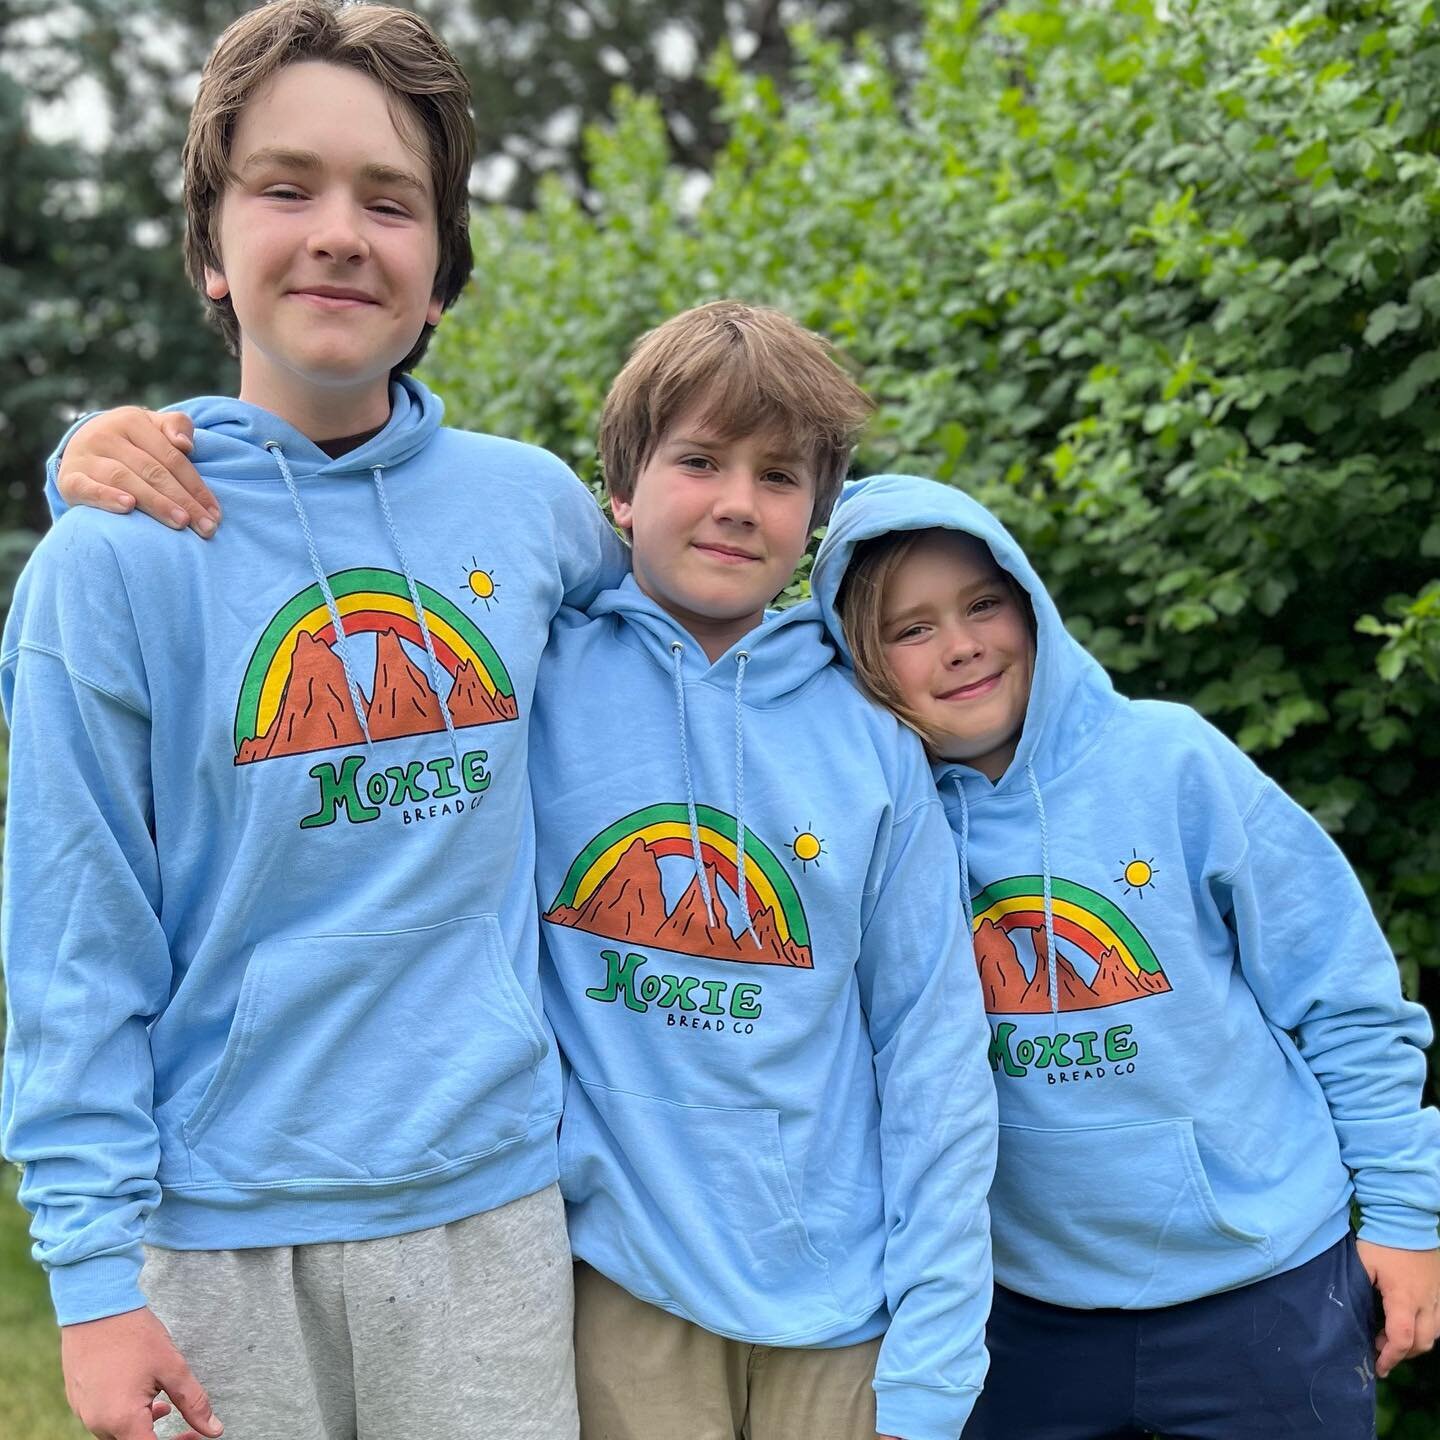 What&rsquo;s one more photo of our new logo hoodie on the Clark boys &hellip;.huge thanks to our designer Abimbola Olatunbosun @visualbeam for the new colorful pandemic make you happy logo. Abimbola is a Queens College grad and a student of our OG de